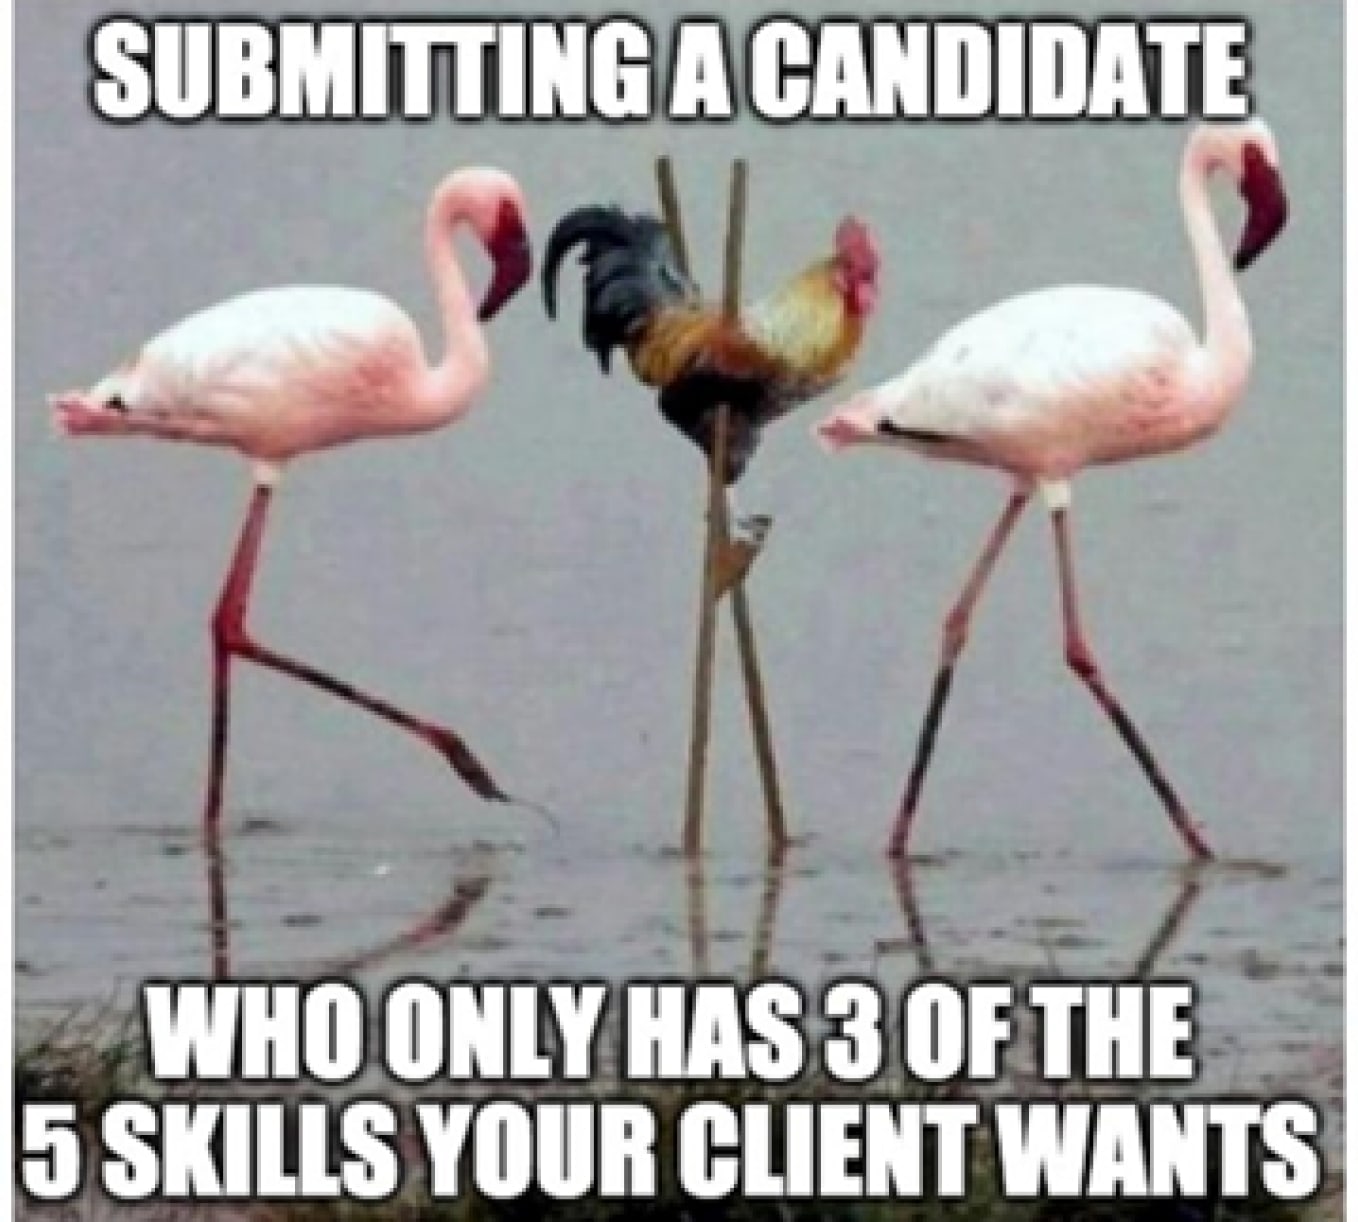 25+ Hilarious Recruiting Memes That Will Leave You ROFL